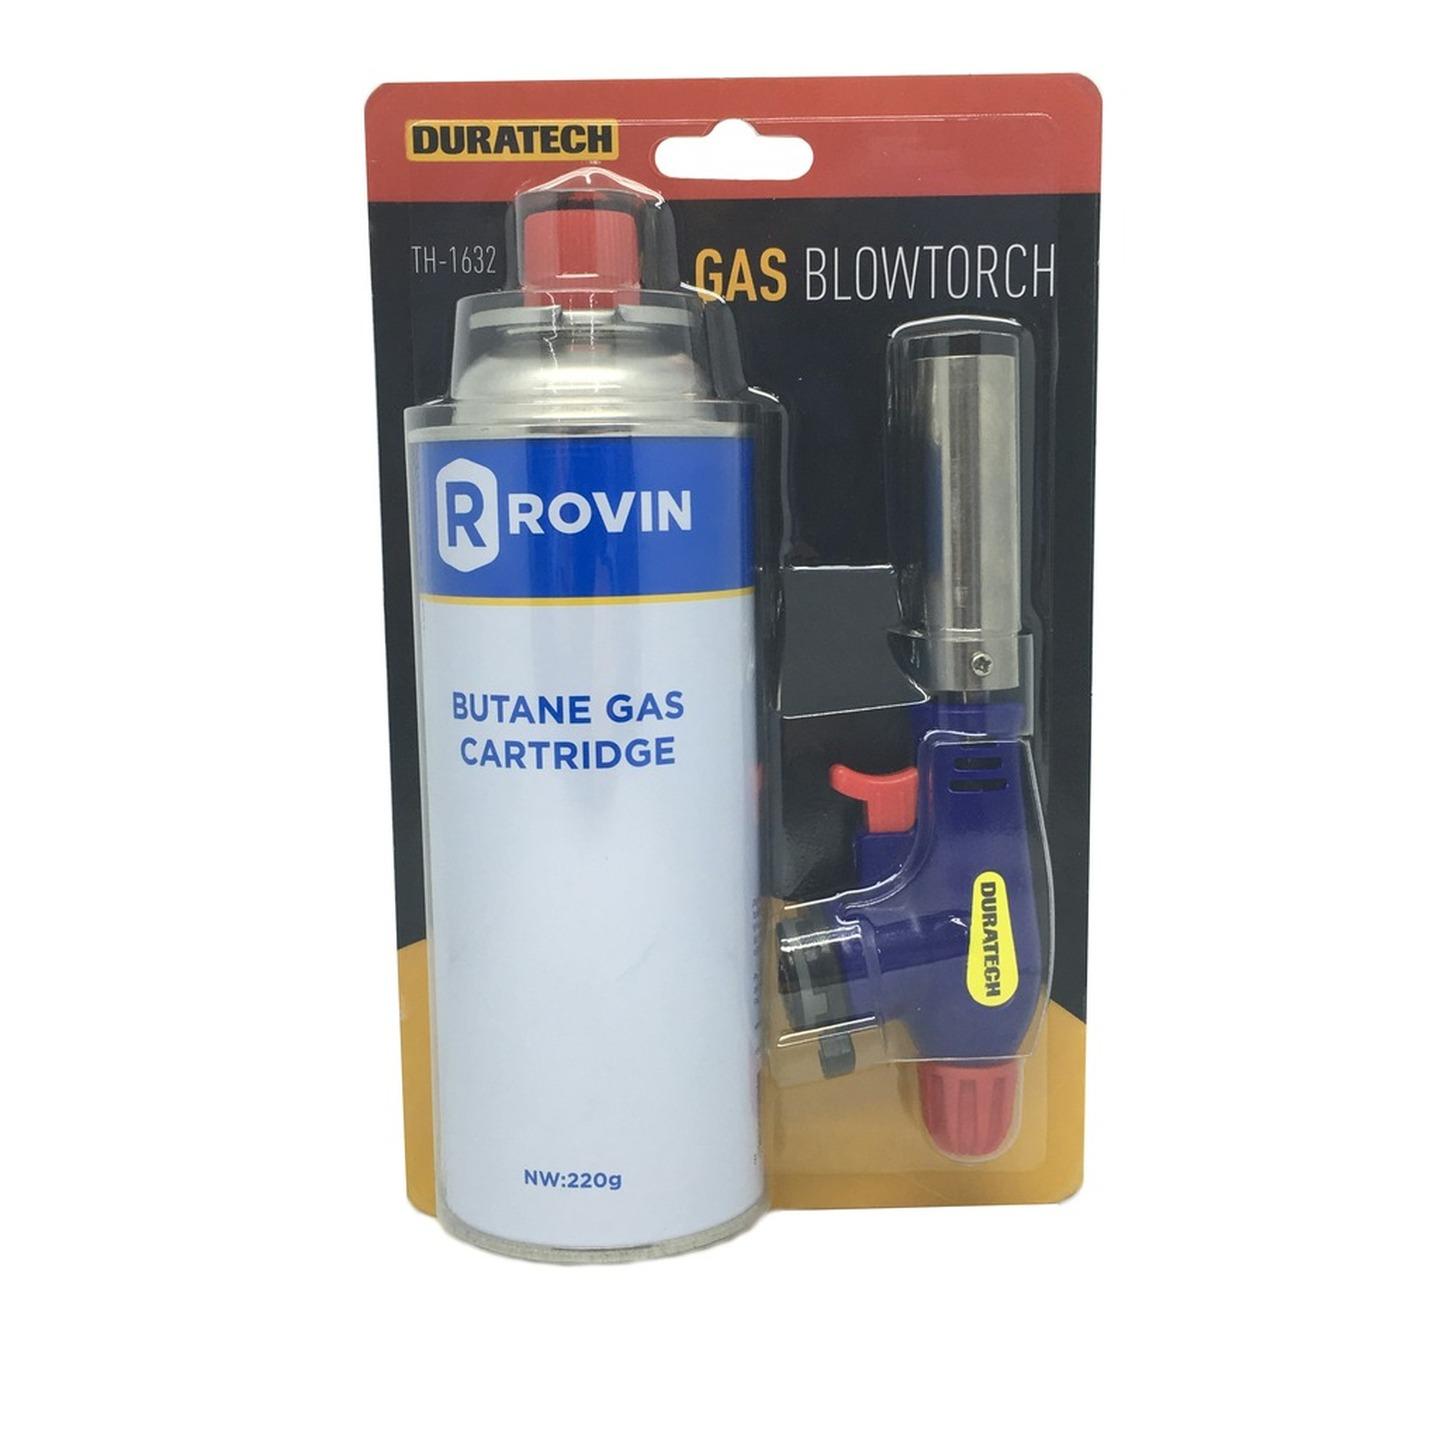 Gas Blow Torch with Butane gas